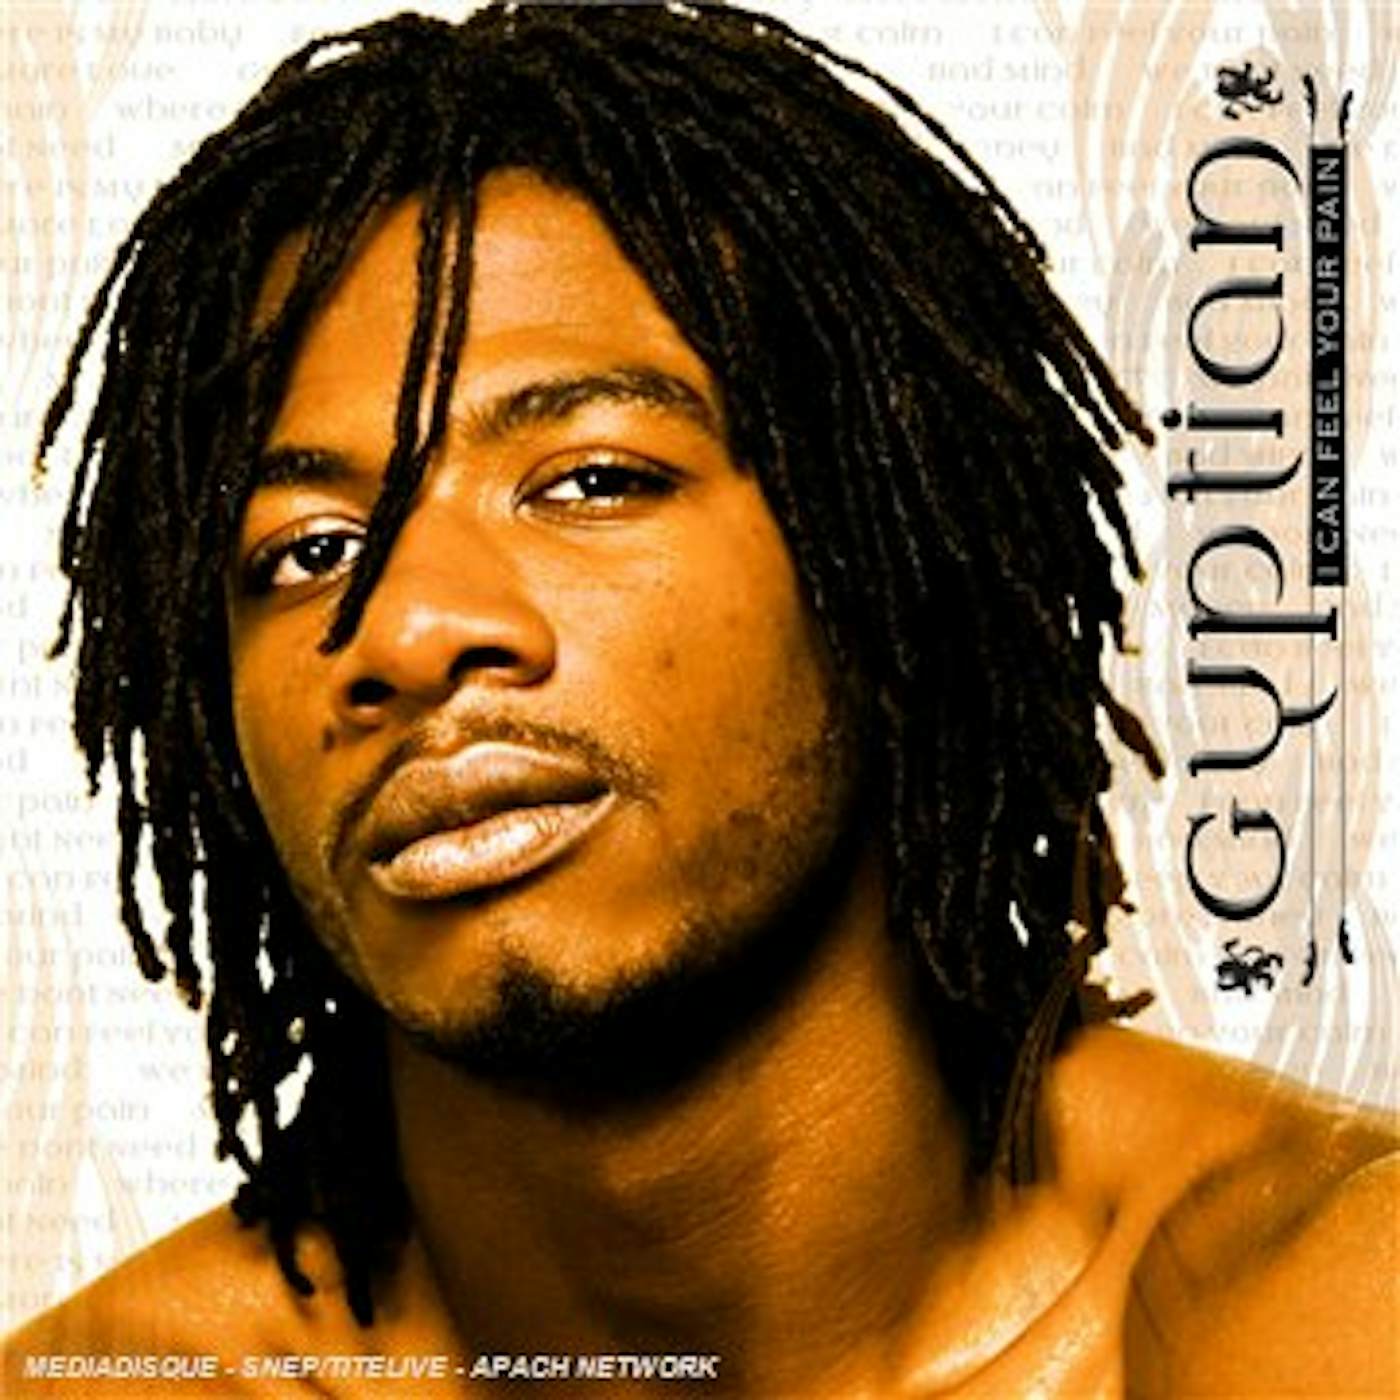 Gyptian I CAN FEEL YOUR PAIN CD